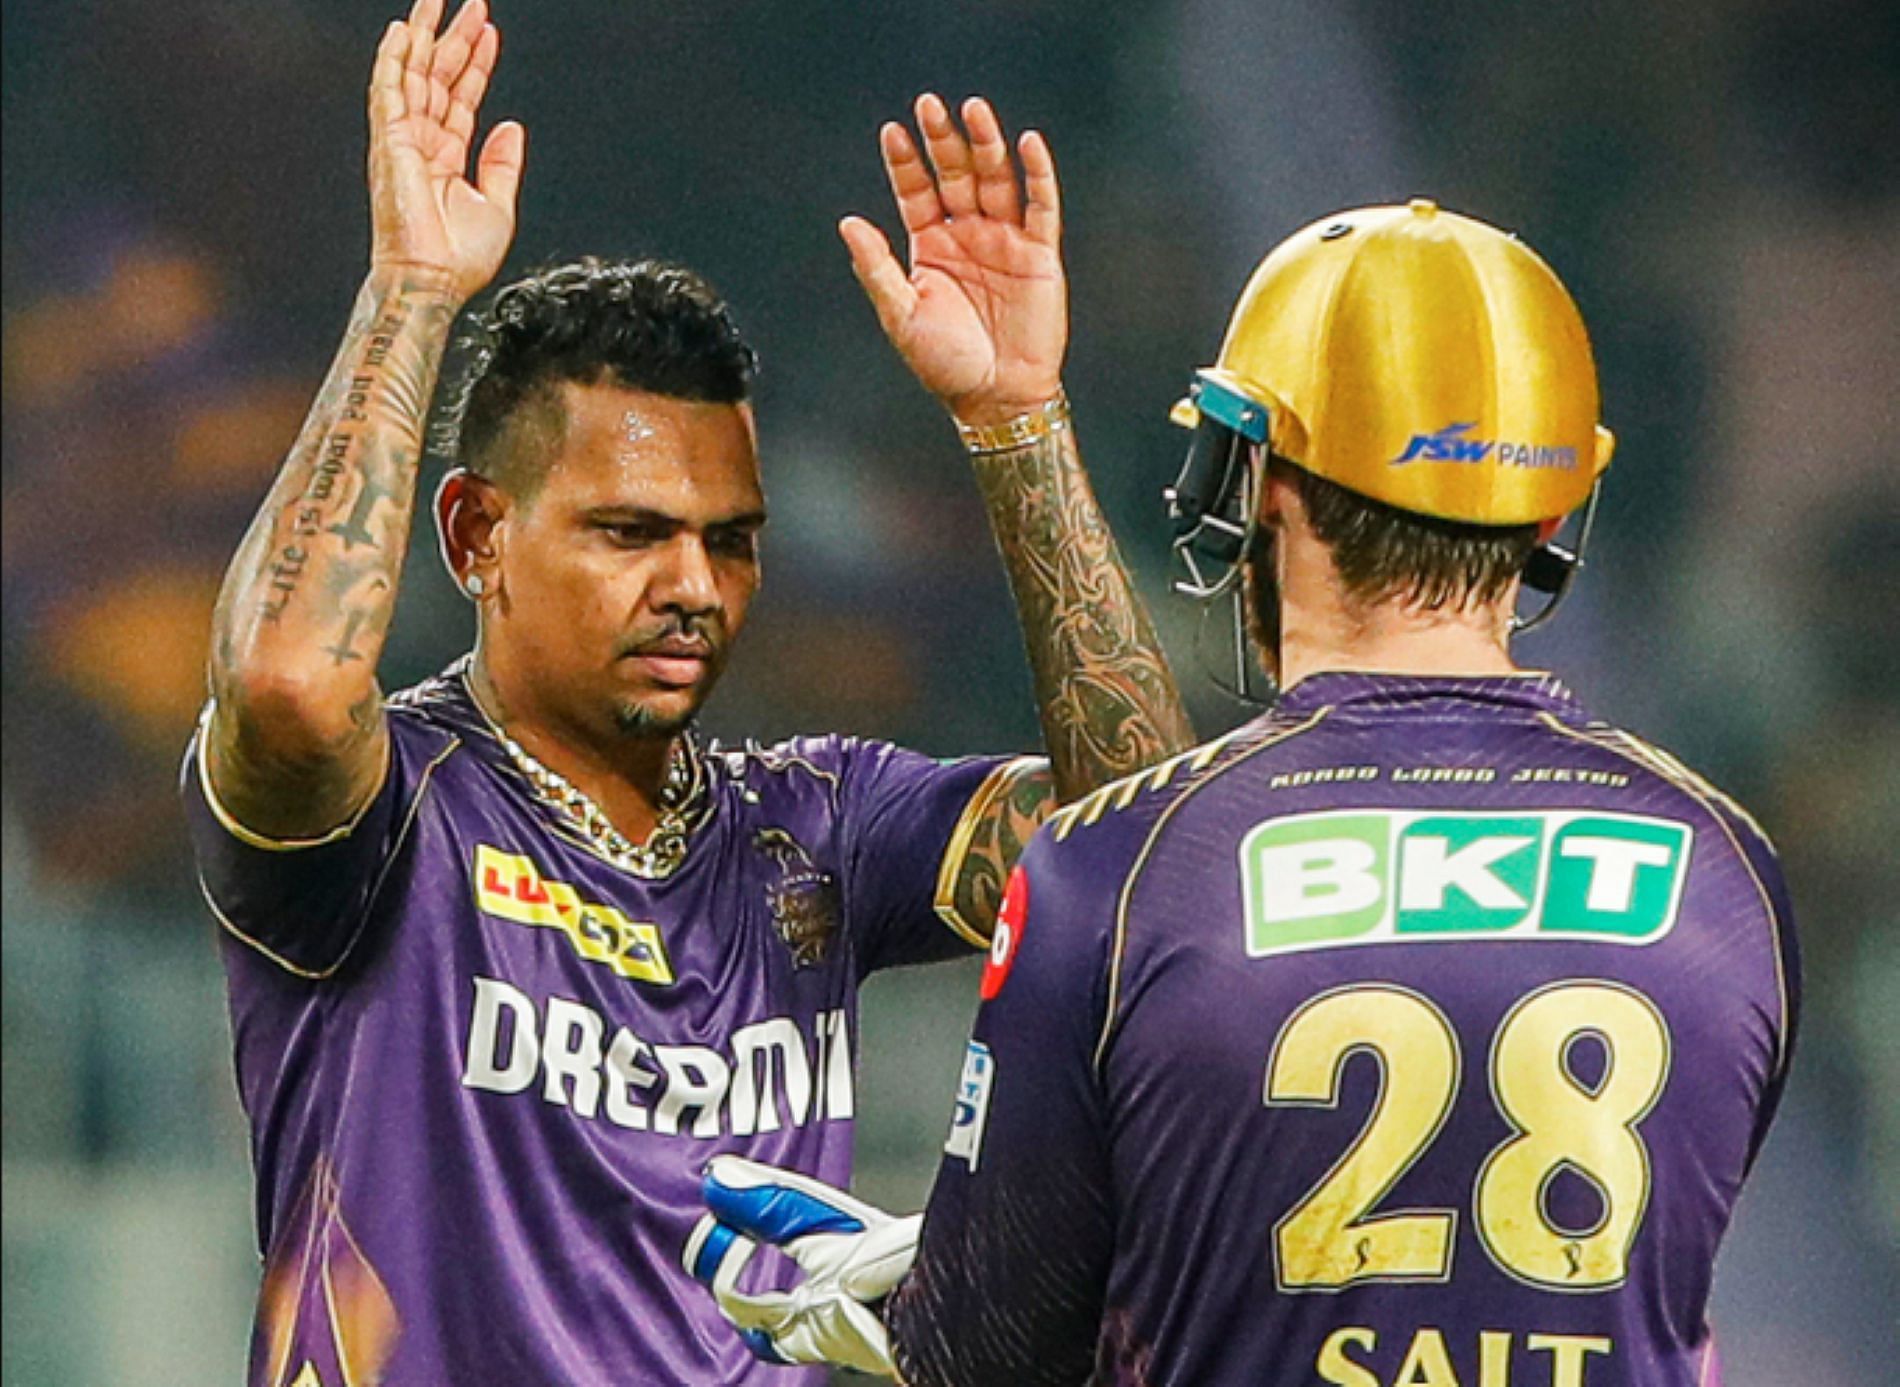 Narine produced a miserly spell to help KKR pull off a thrilling win [Credits: KKR Twitter handle]